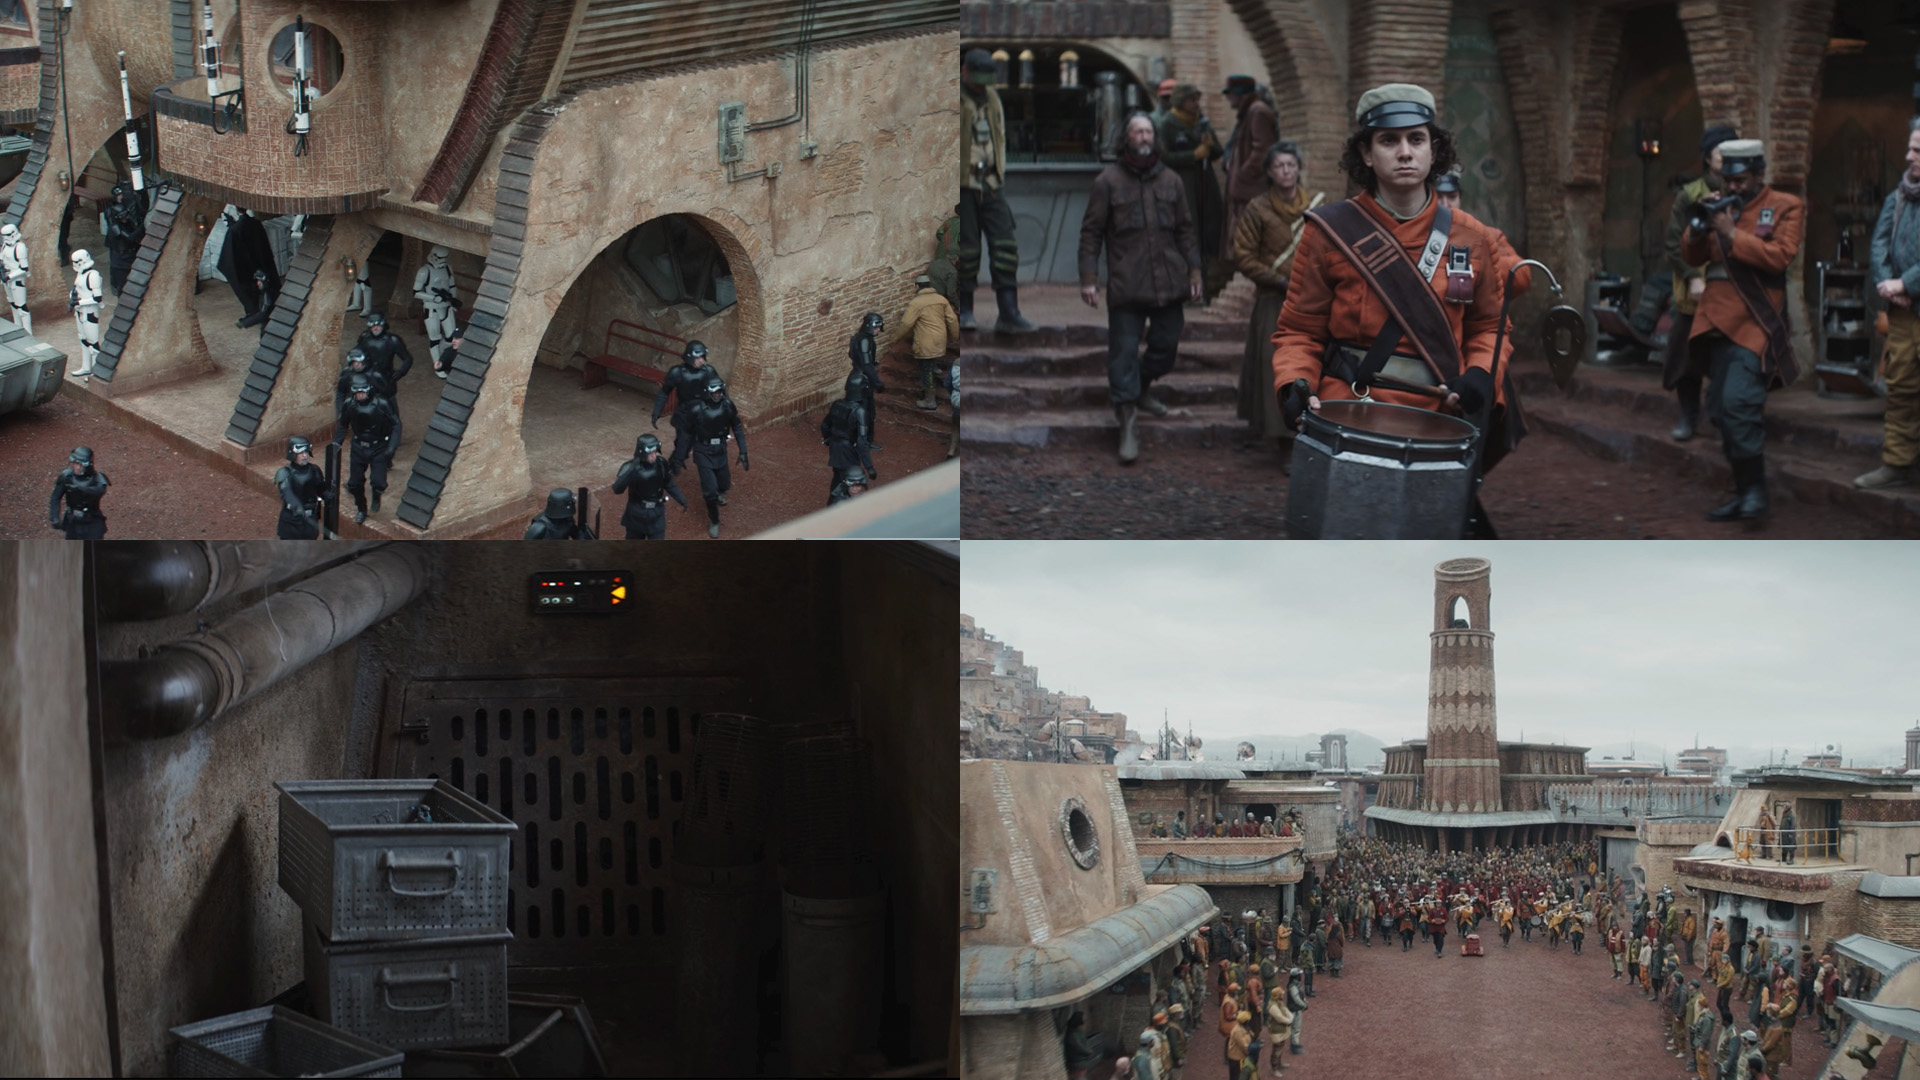 cinematography in Andor - works together with the production design